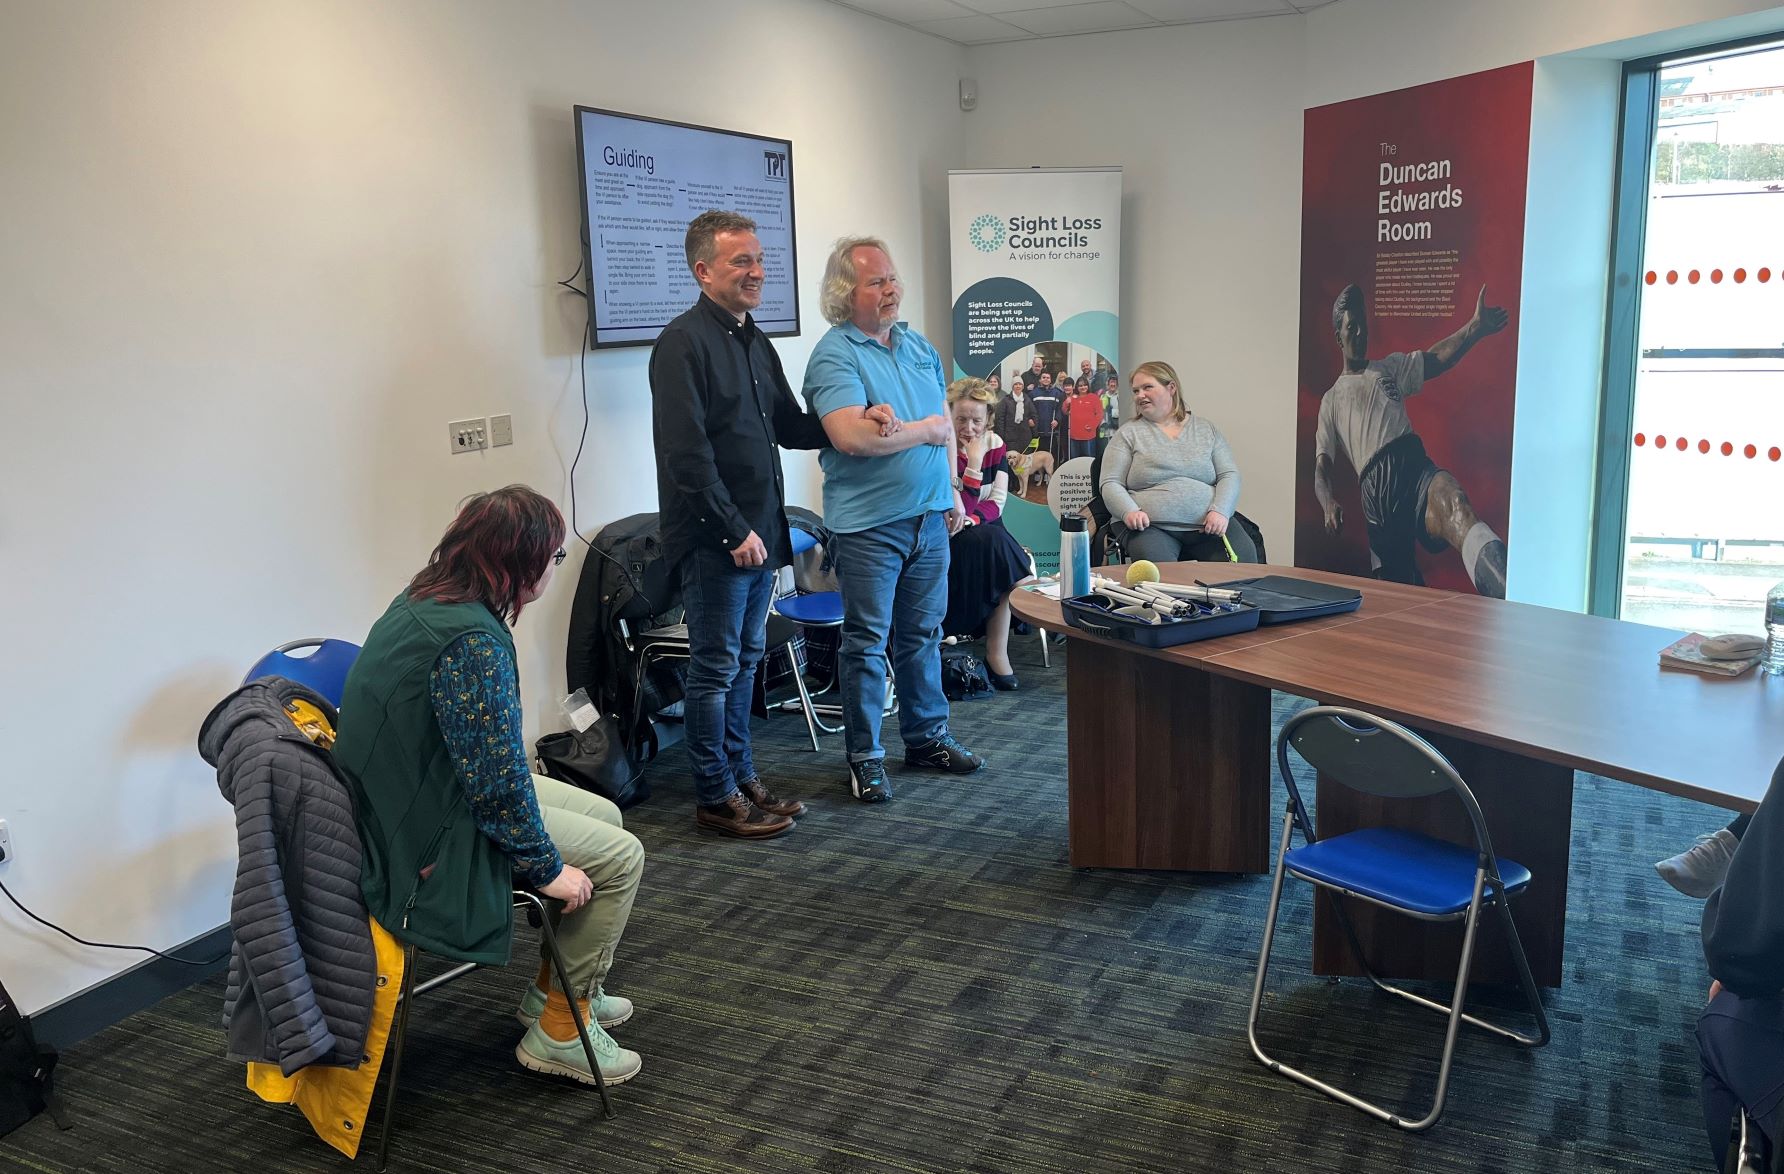 Martin Symcox, Head of Sport & Development at TPT, is standing at the front of the room with SLC member, Steve. They are demonstrating how to guide someone.